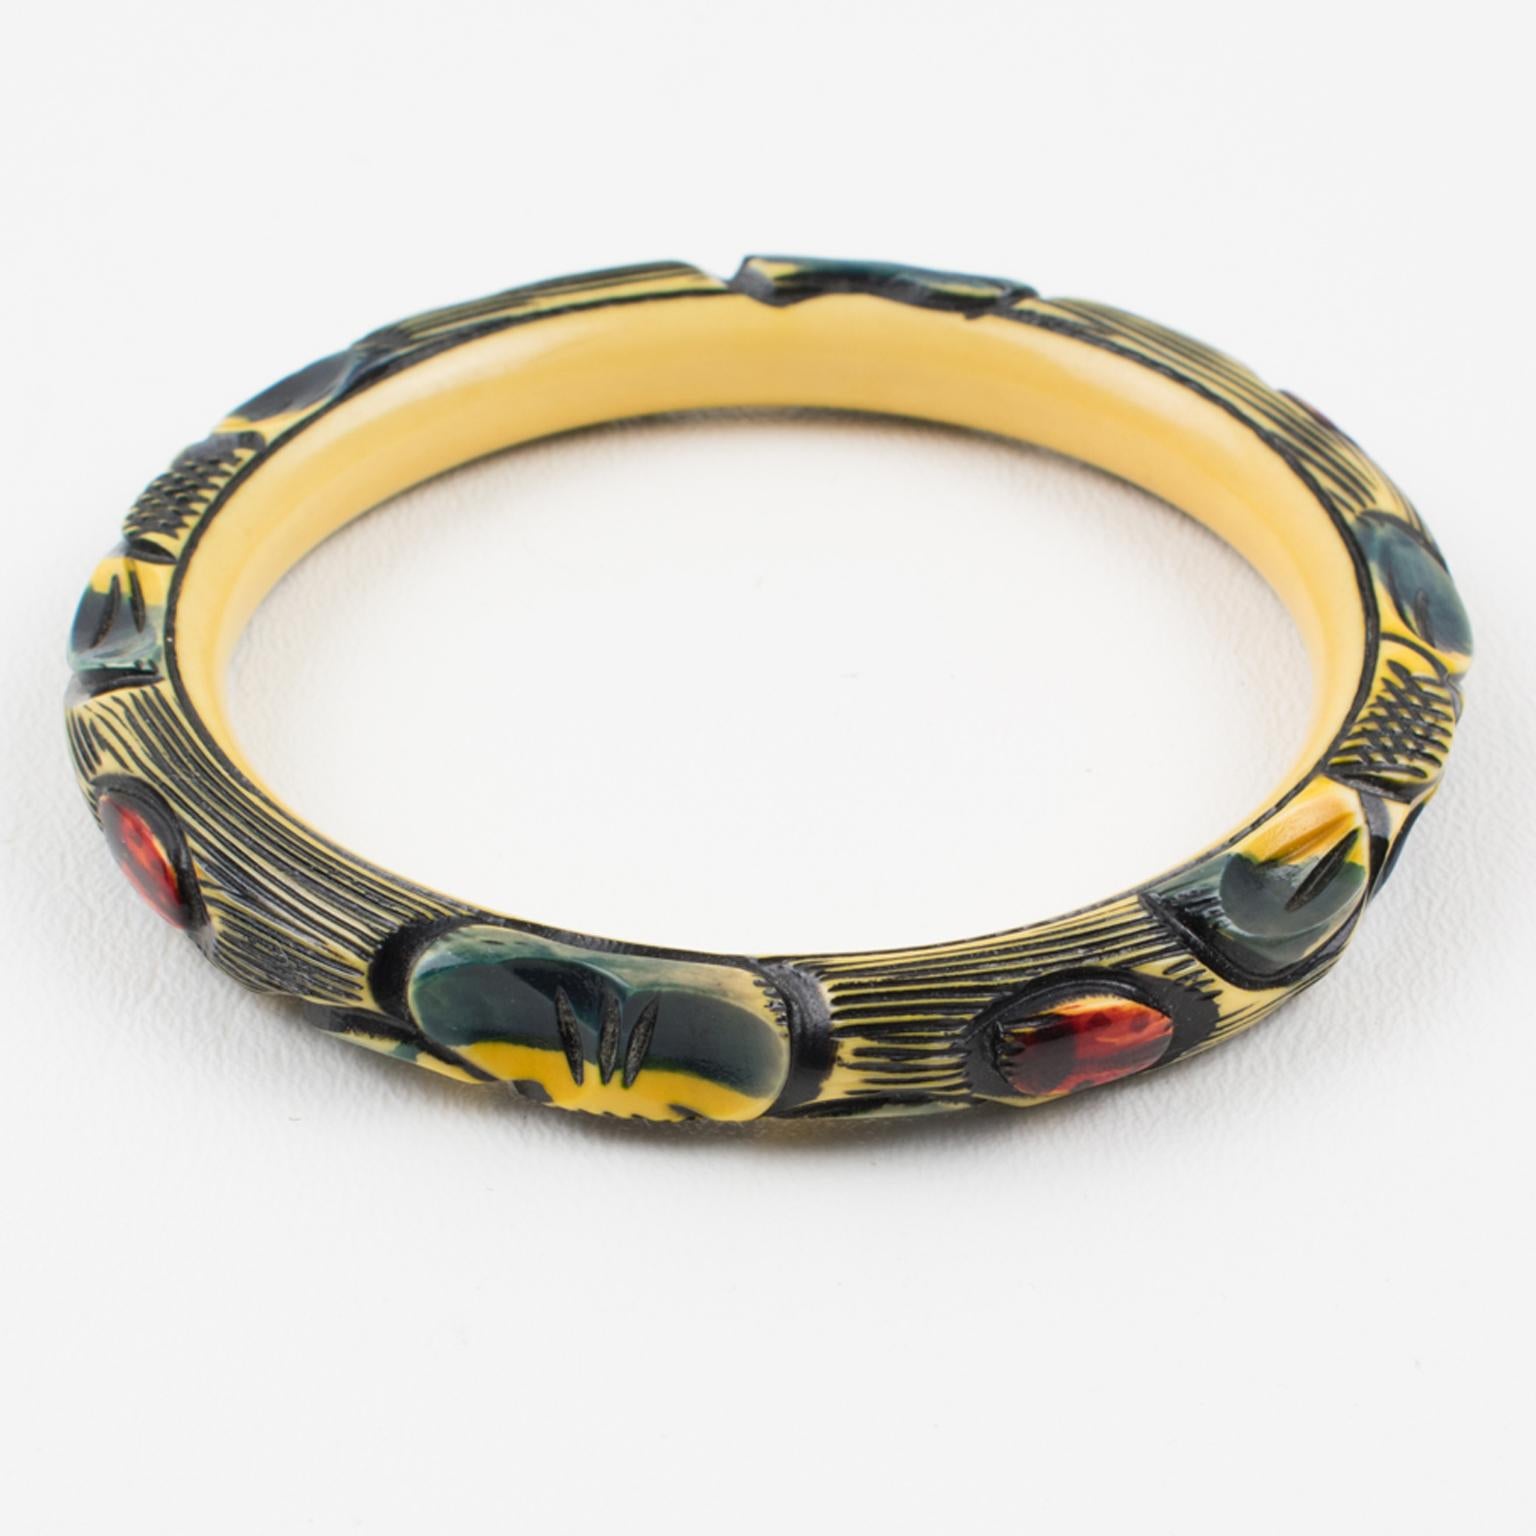 Beautiful 1925s Art Deco celluloid bracelet bangle. Features floral and ladybugs design, four motifs of each all around the bracelet deeply carved, painted, and stained. A lovely range of assorted colors with off-white, black, navy blue, yellow, and